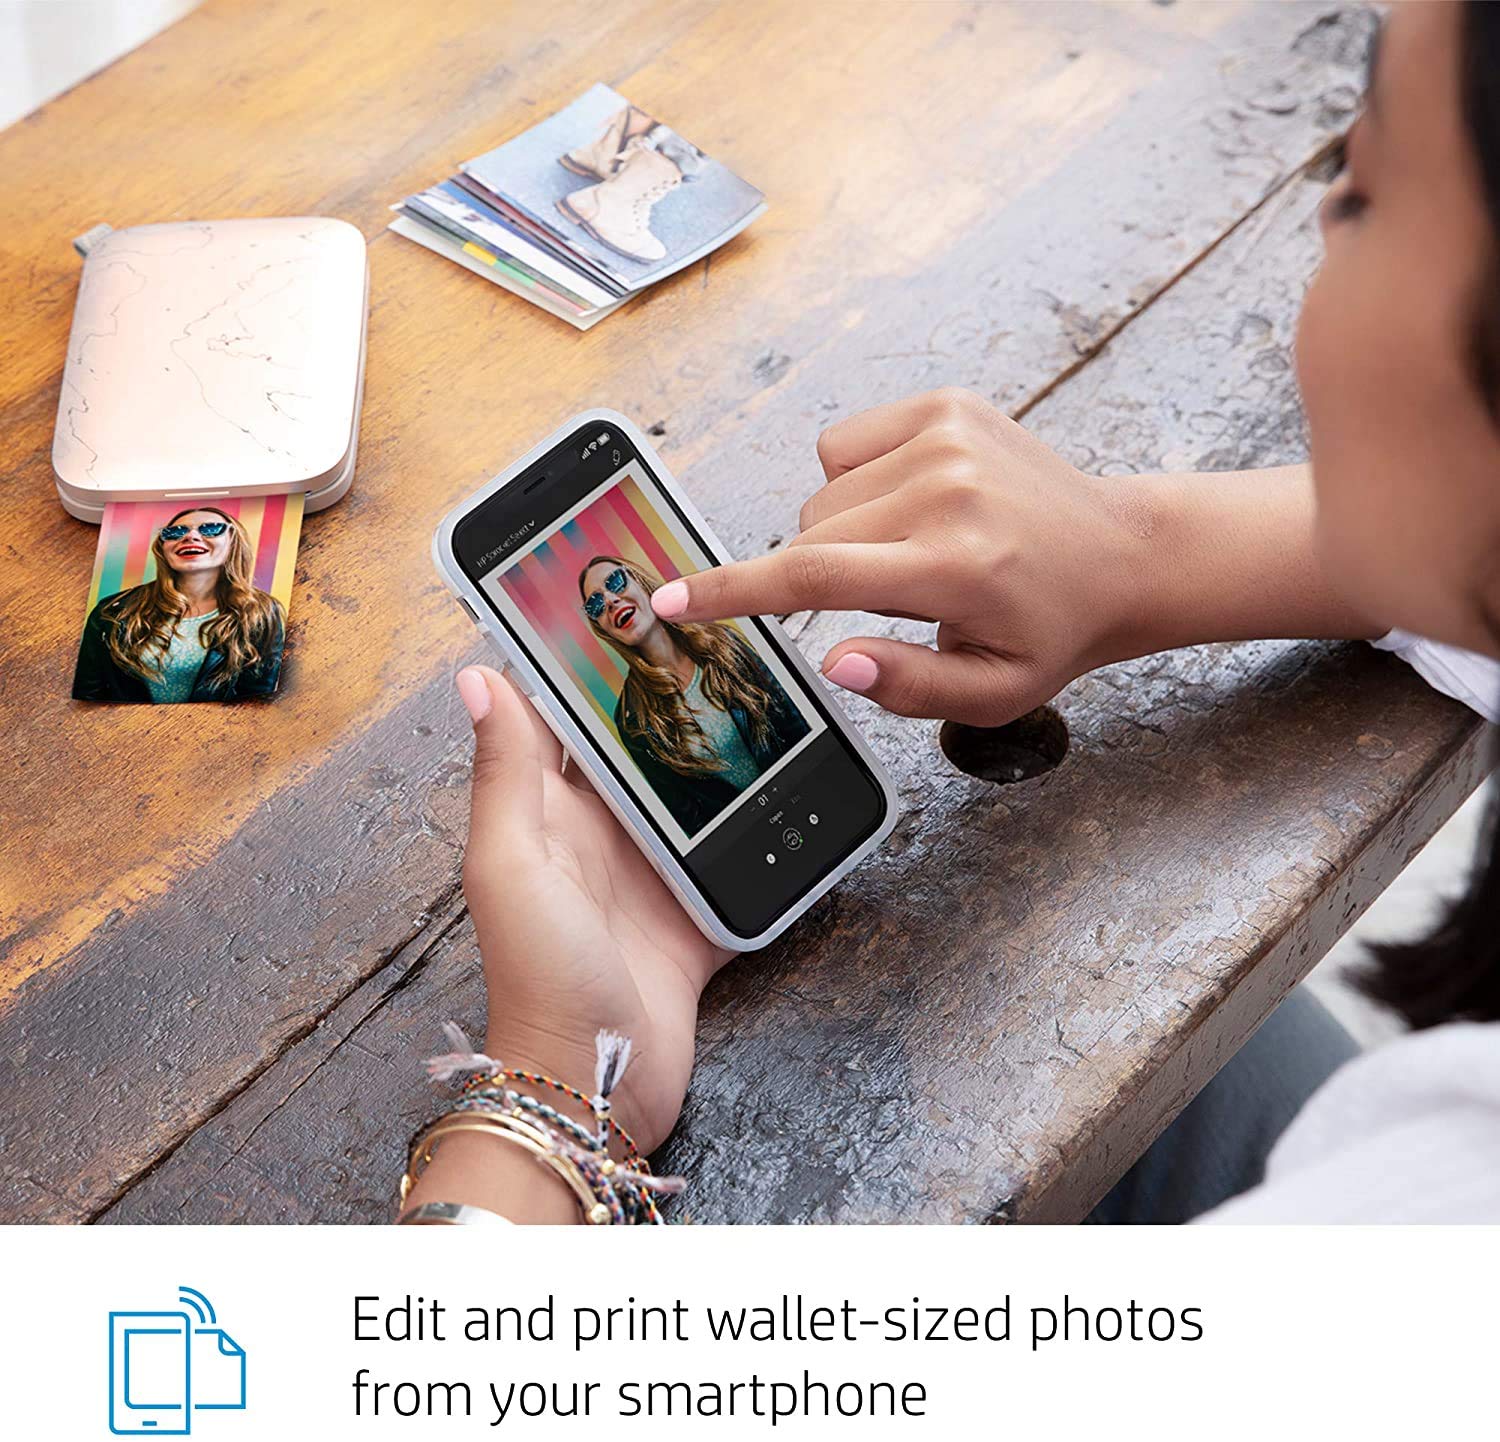 HP Store Sprocket Select Portable Photo Printer Stylize Social Media Photos and Print 30% Larger Pictures on 2.3x3.4 Sticky-Backed Paper (5XH49A)